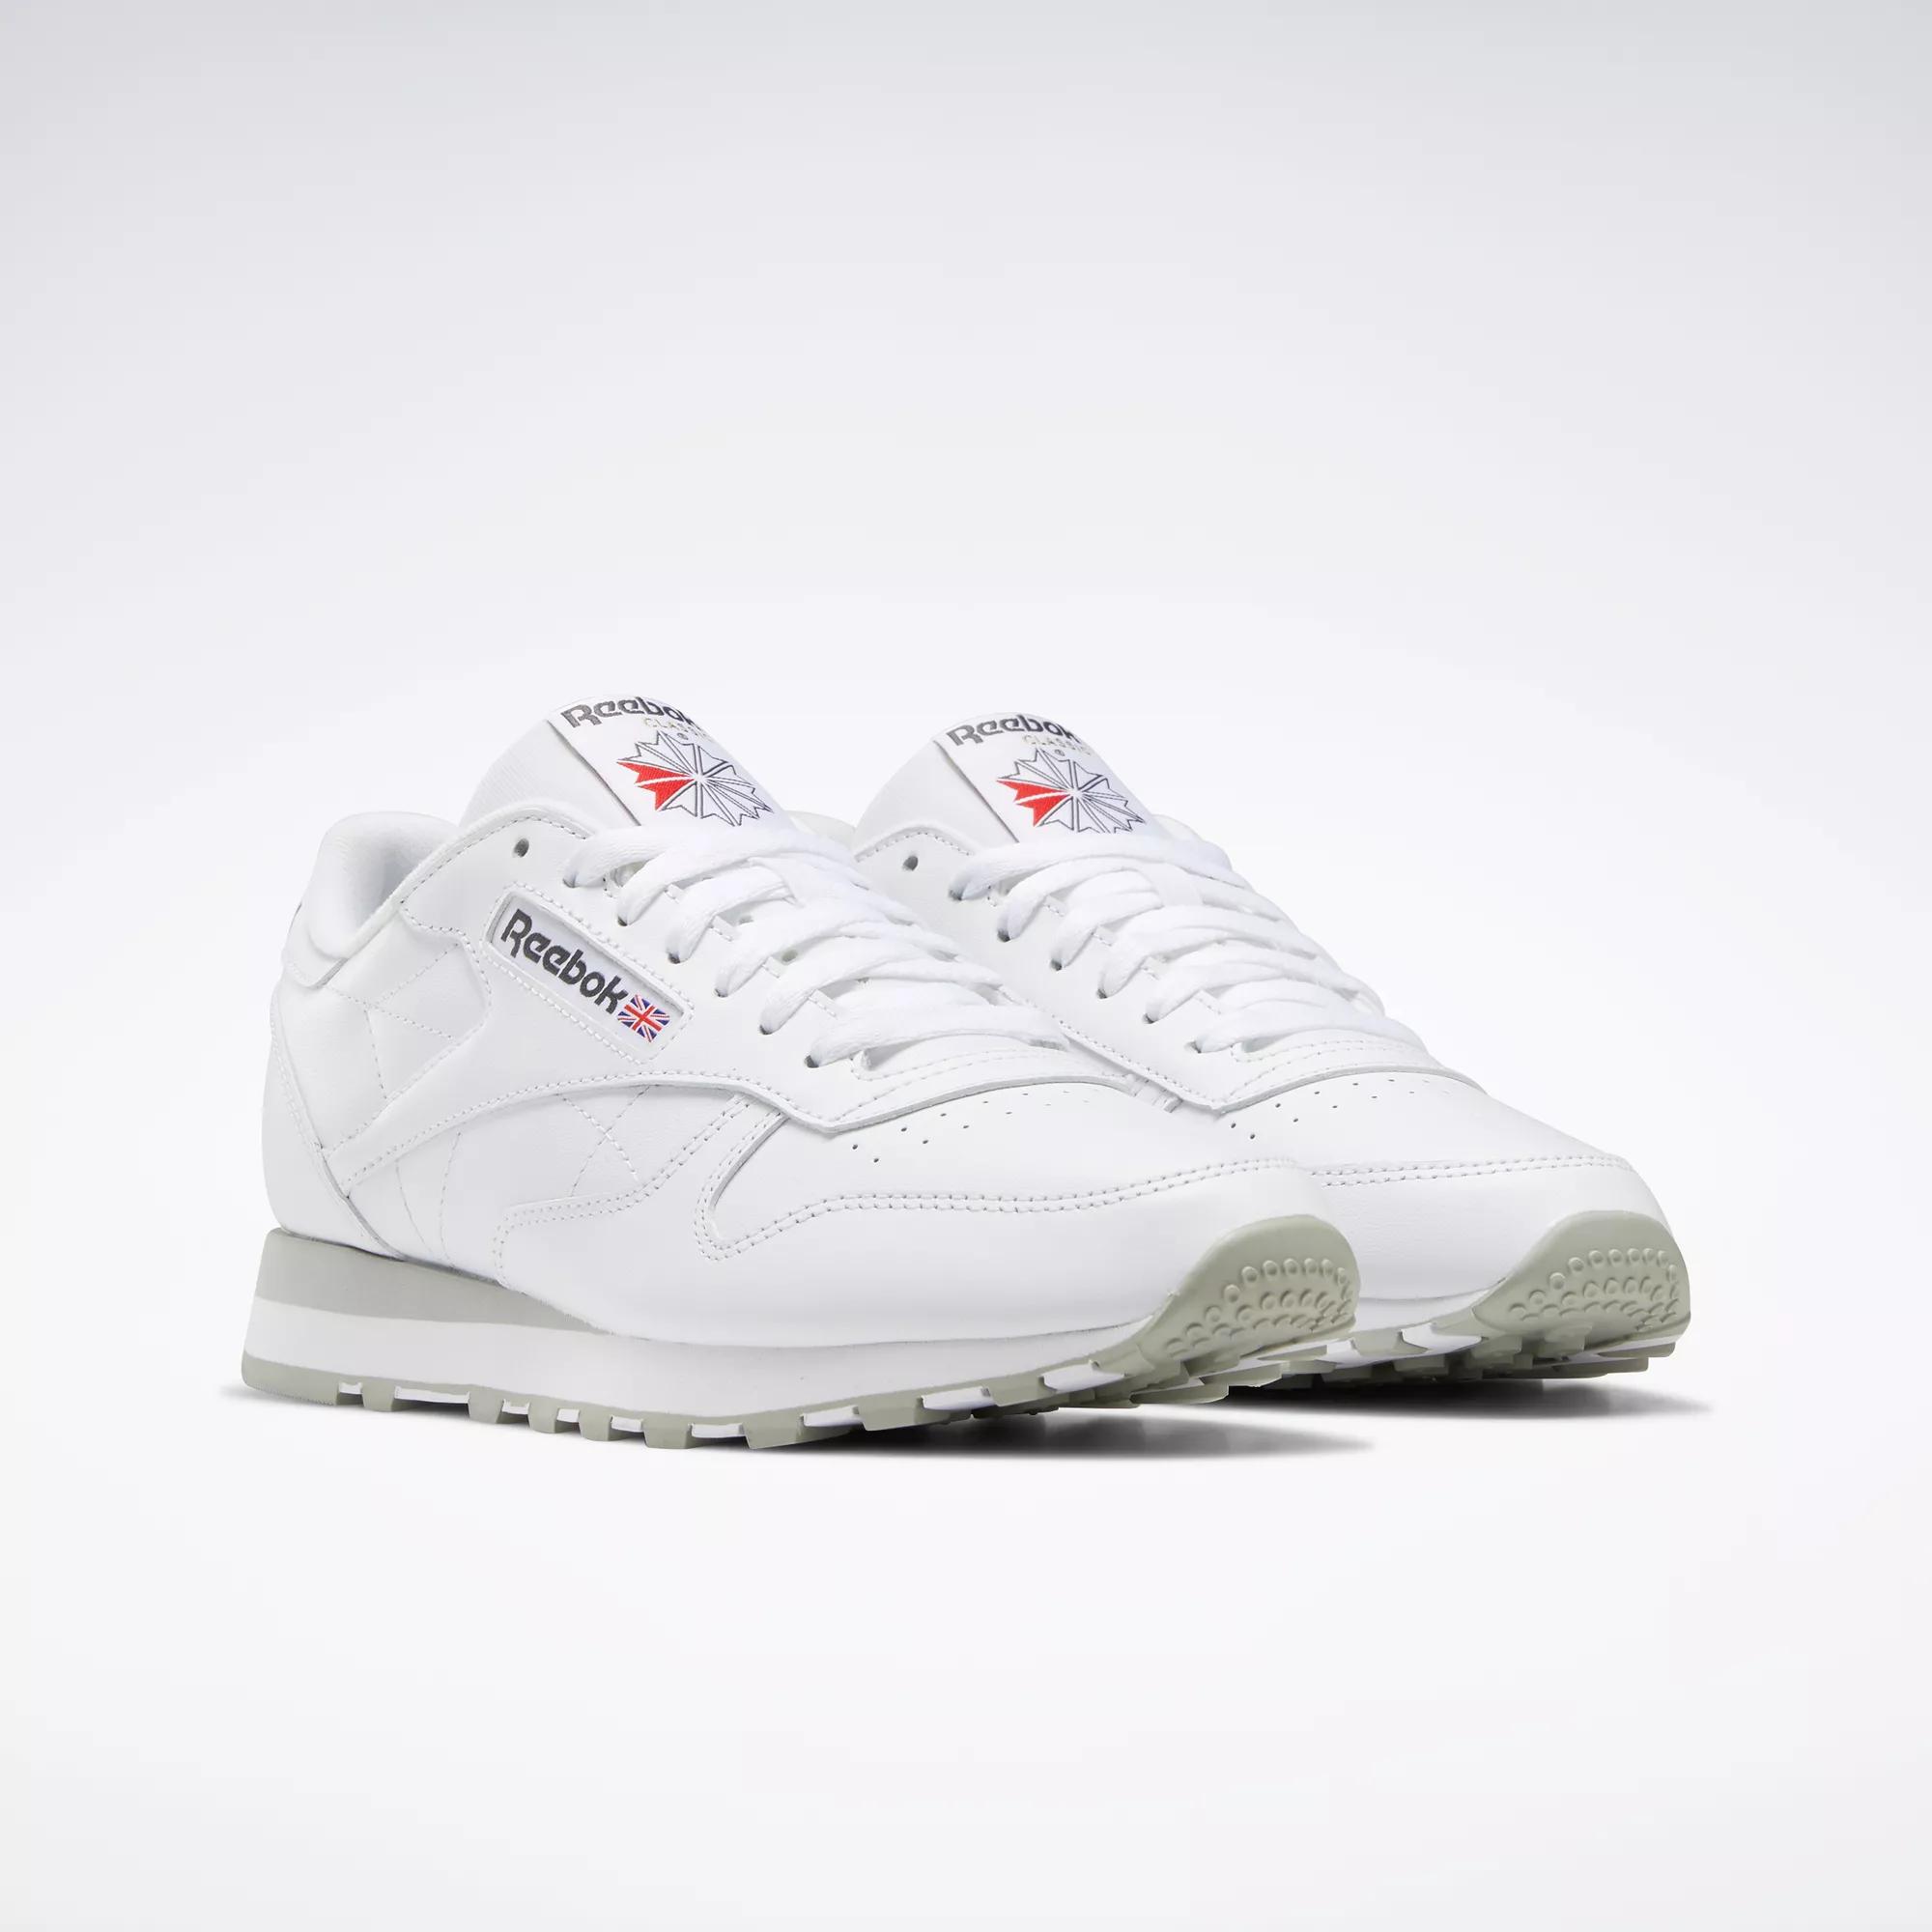 Perfervid lotus tykkelse Classic Leather Shoes - Ftwr White / Pure Grey 3 / Pure Grey 7 | Reebok